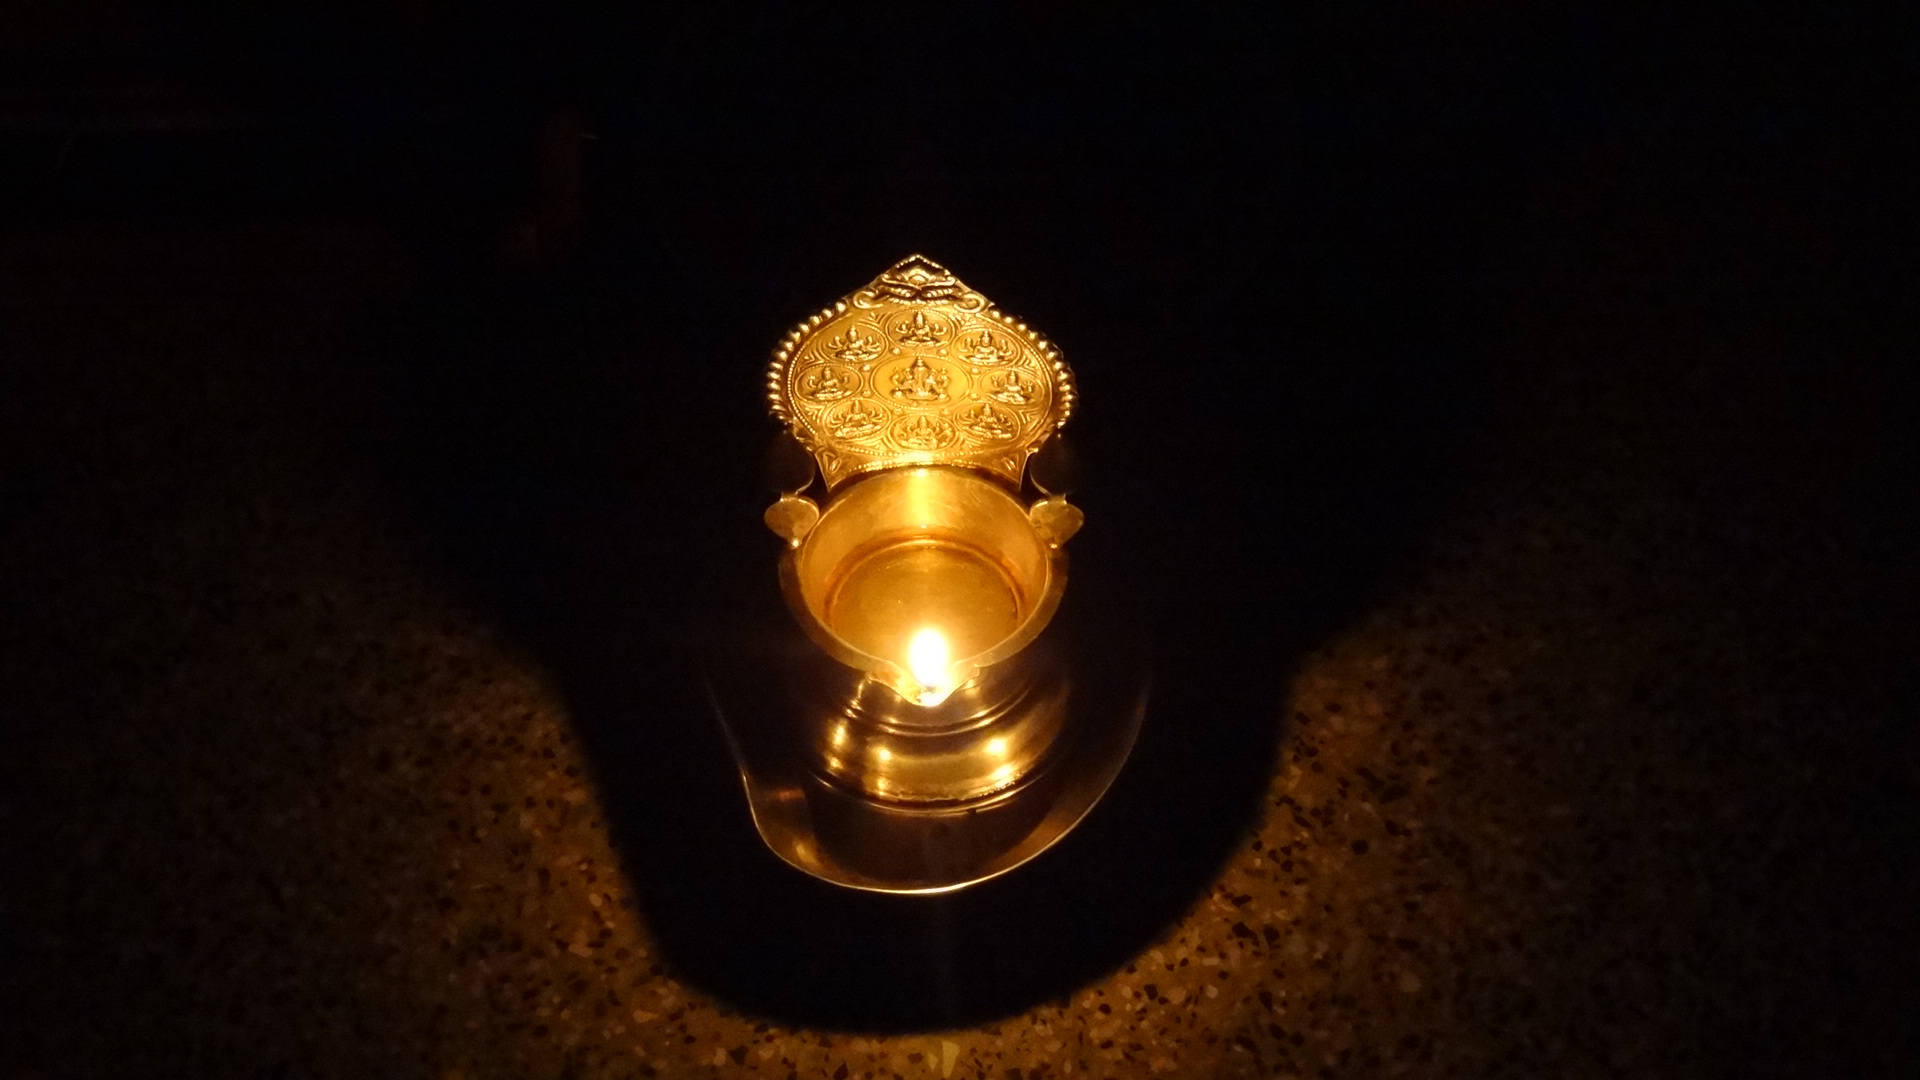 Oil Lamp Wallpaper The Soft Glow Of An